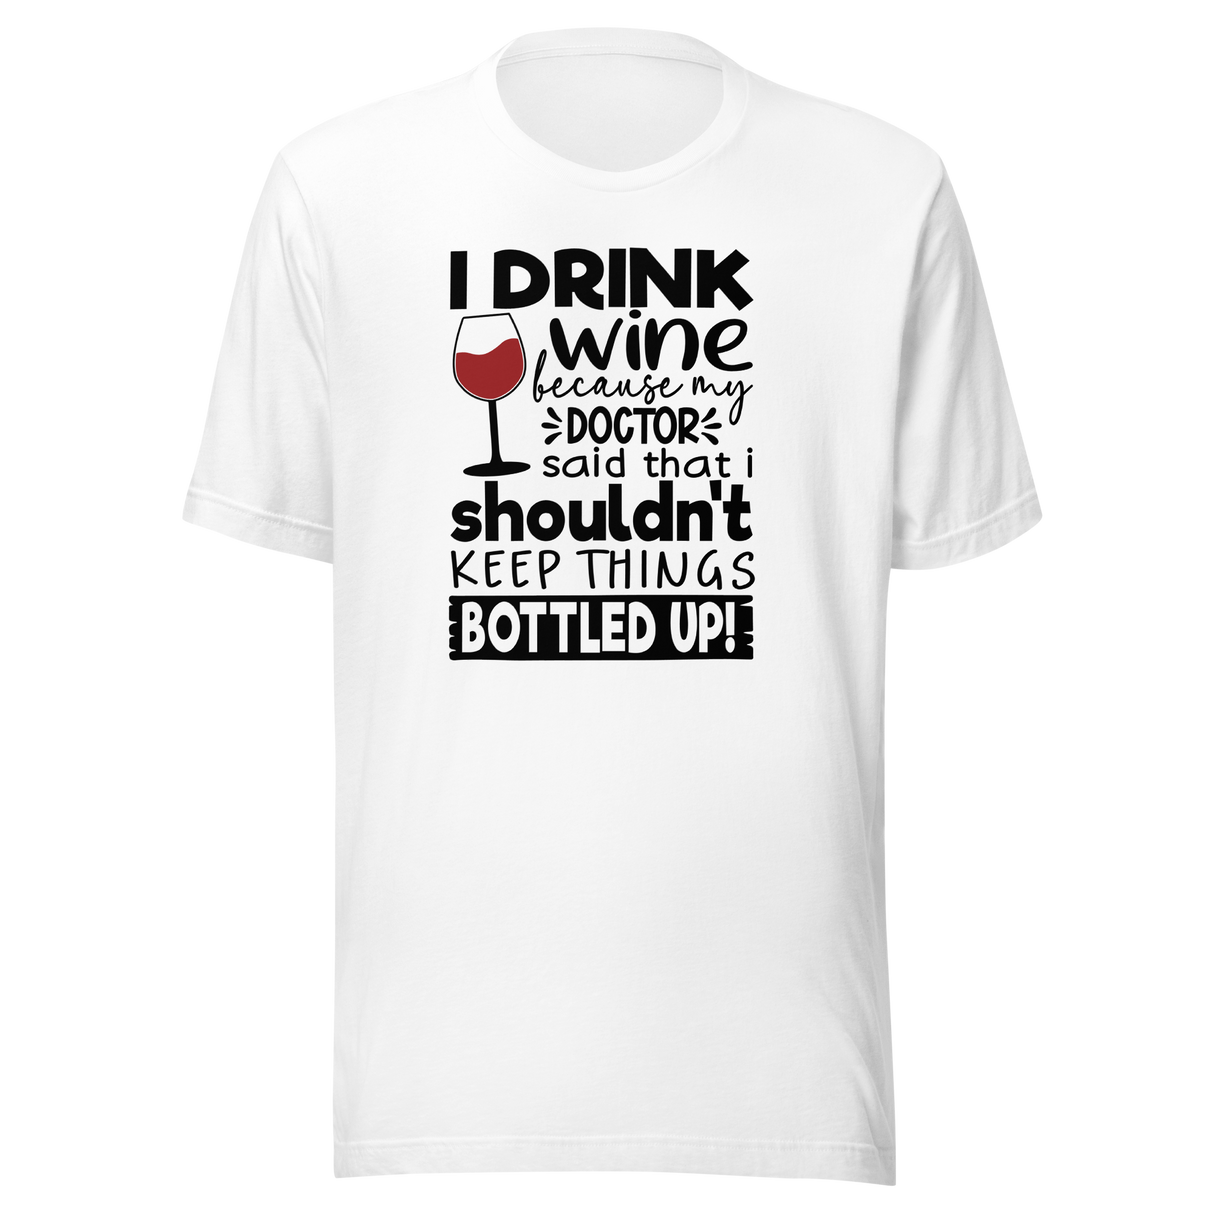 i-drink-wine-because-my-doctor-said-that-i-shouldnt-keep-things-bottled-up-food-tee-life-t-shirt-wine-tee-humor-t-shirt-doctor-tee#color_white